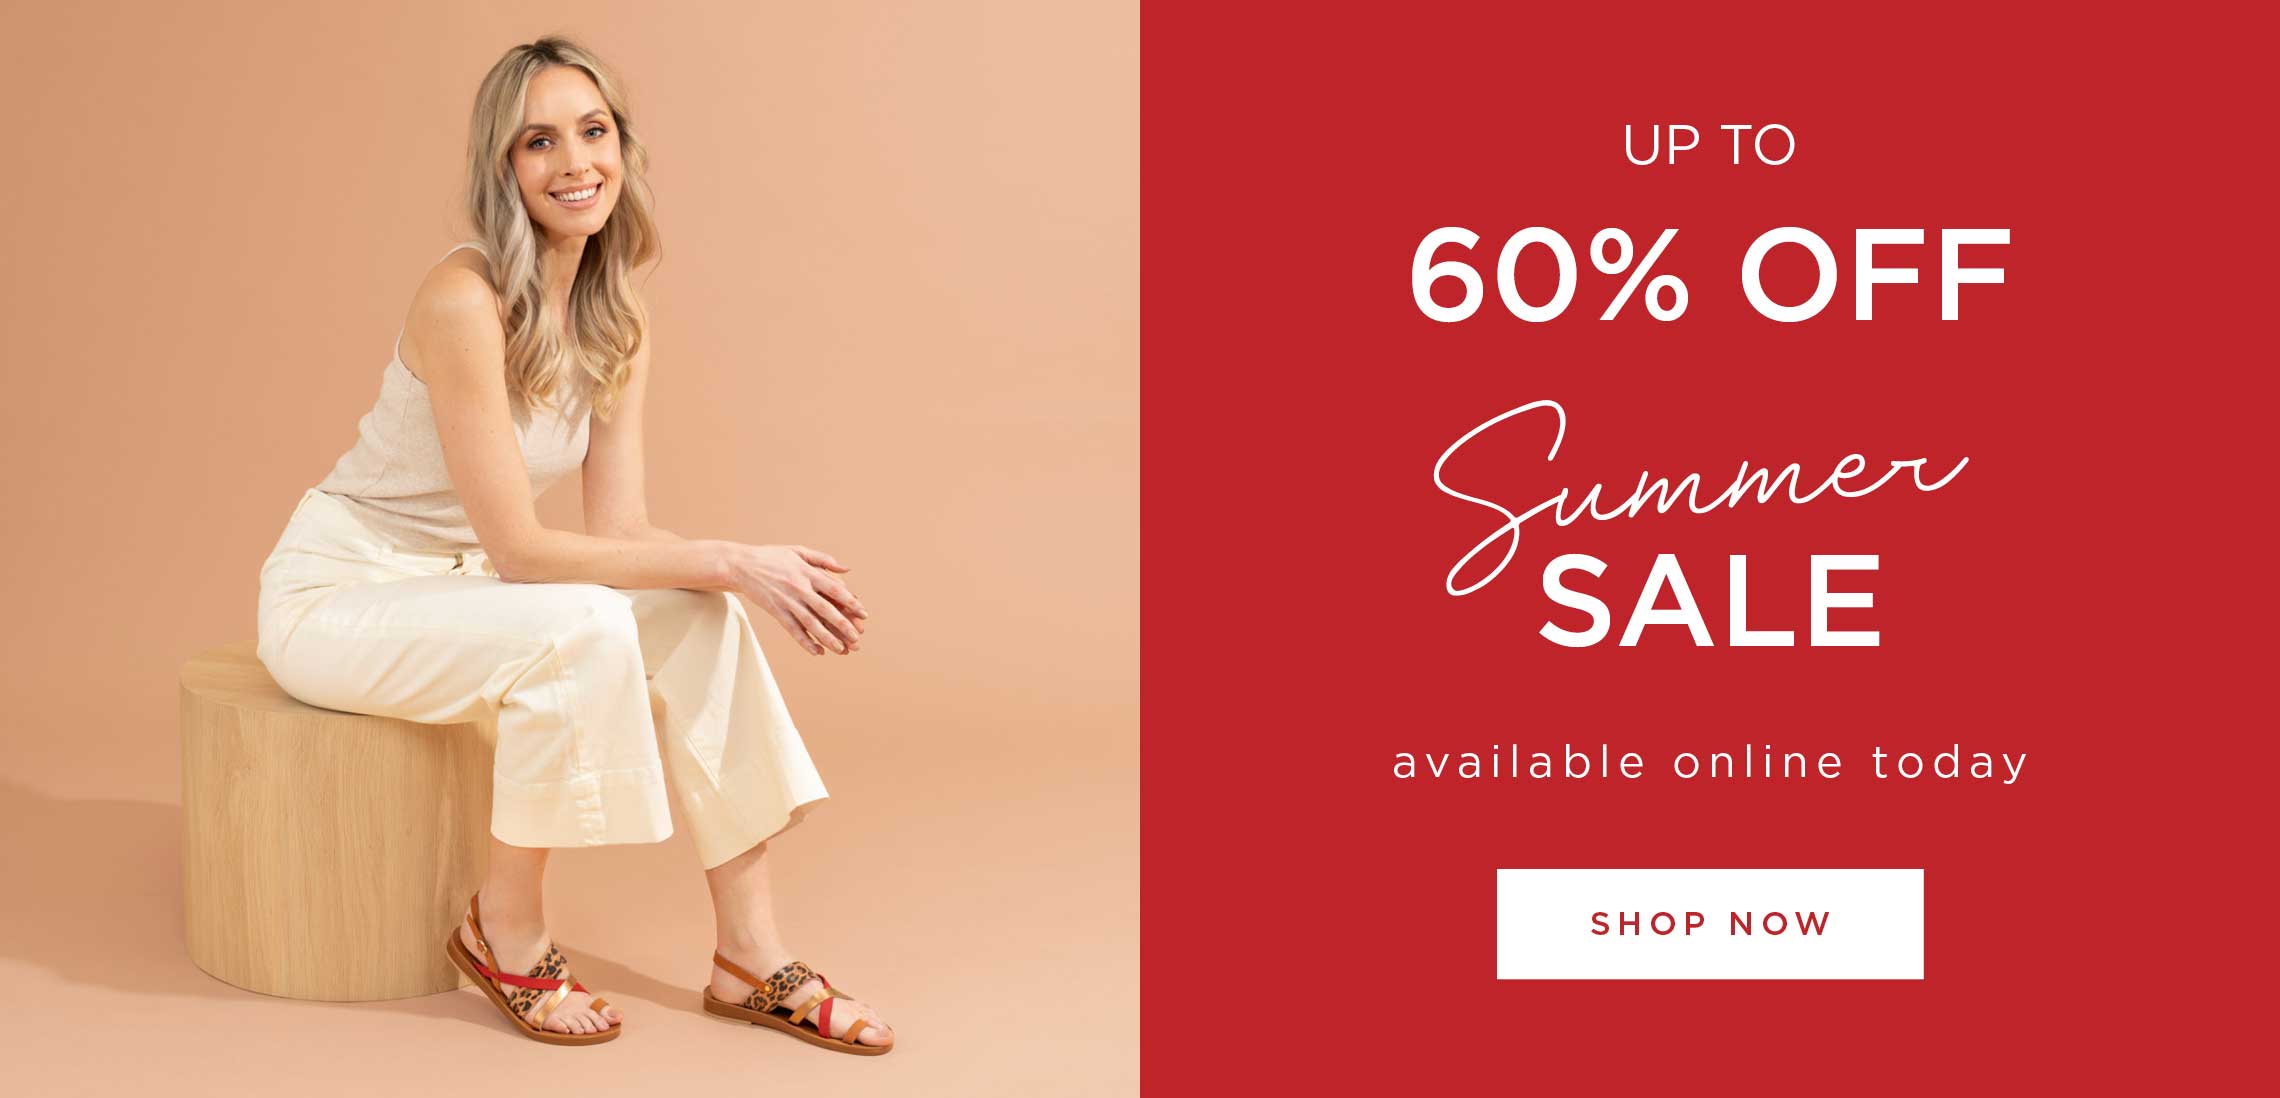 Up to 60% off summer sale available online today - shop now